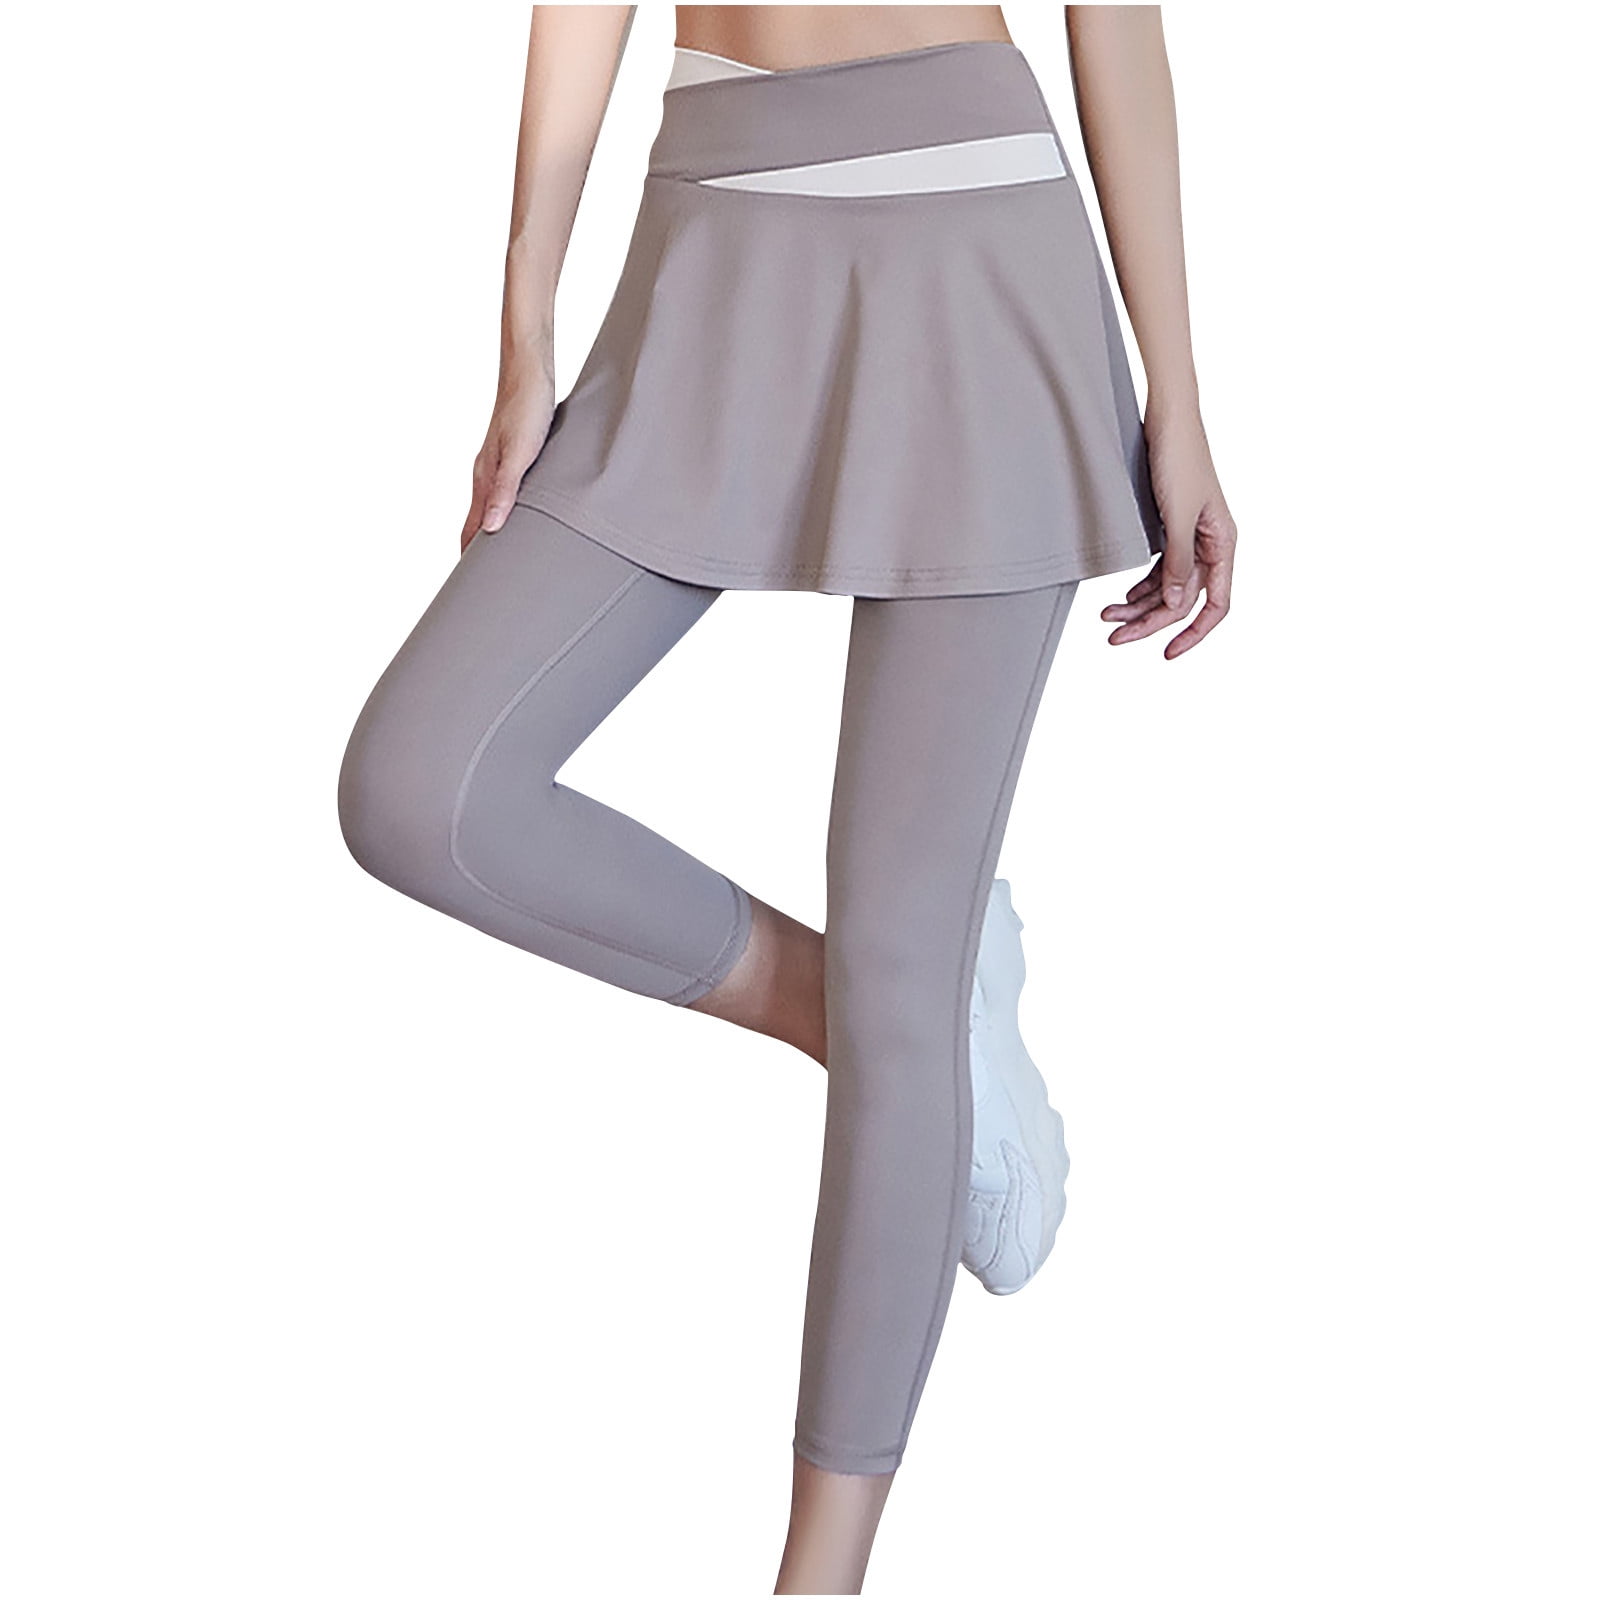 JWZUY Yoga Skirted Leggings with Pockets Women Active Athletic Ruffle  Pleated Golf Tennis Color Block Skirt Pants Purple L 